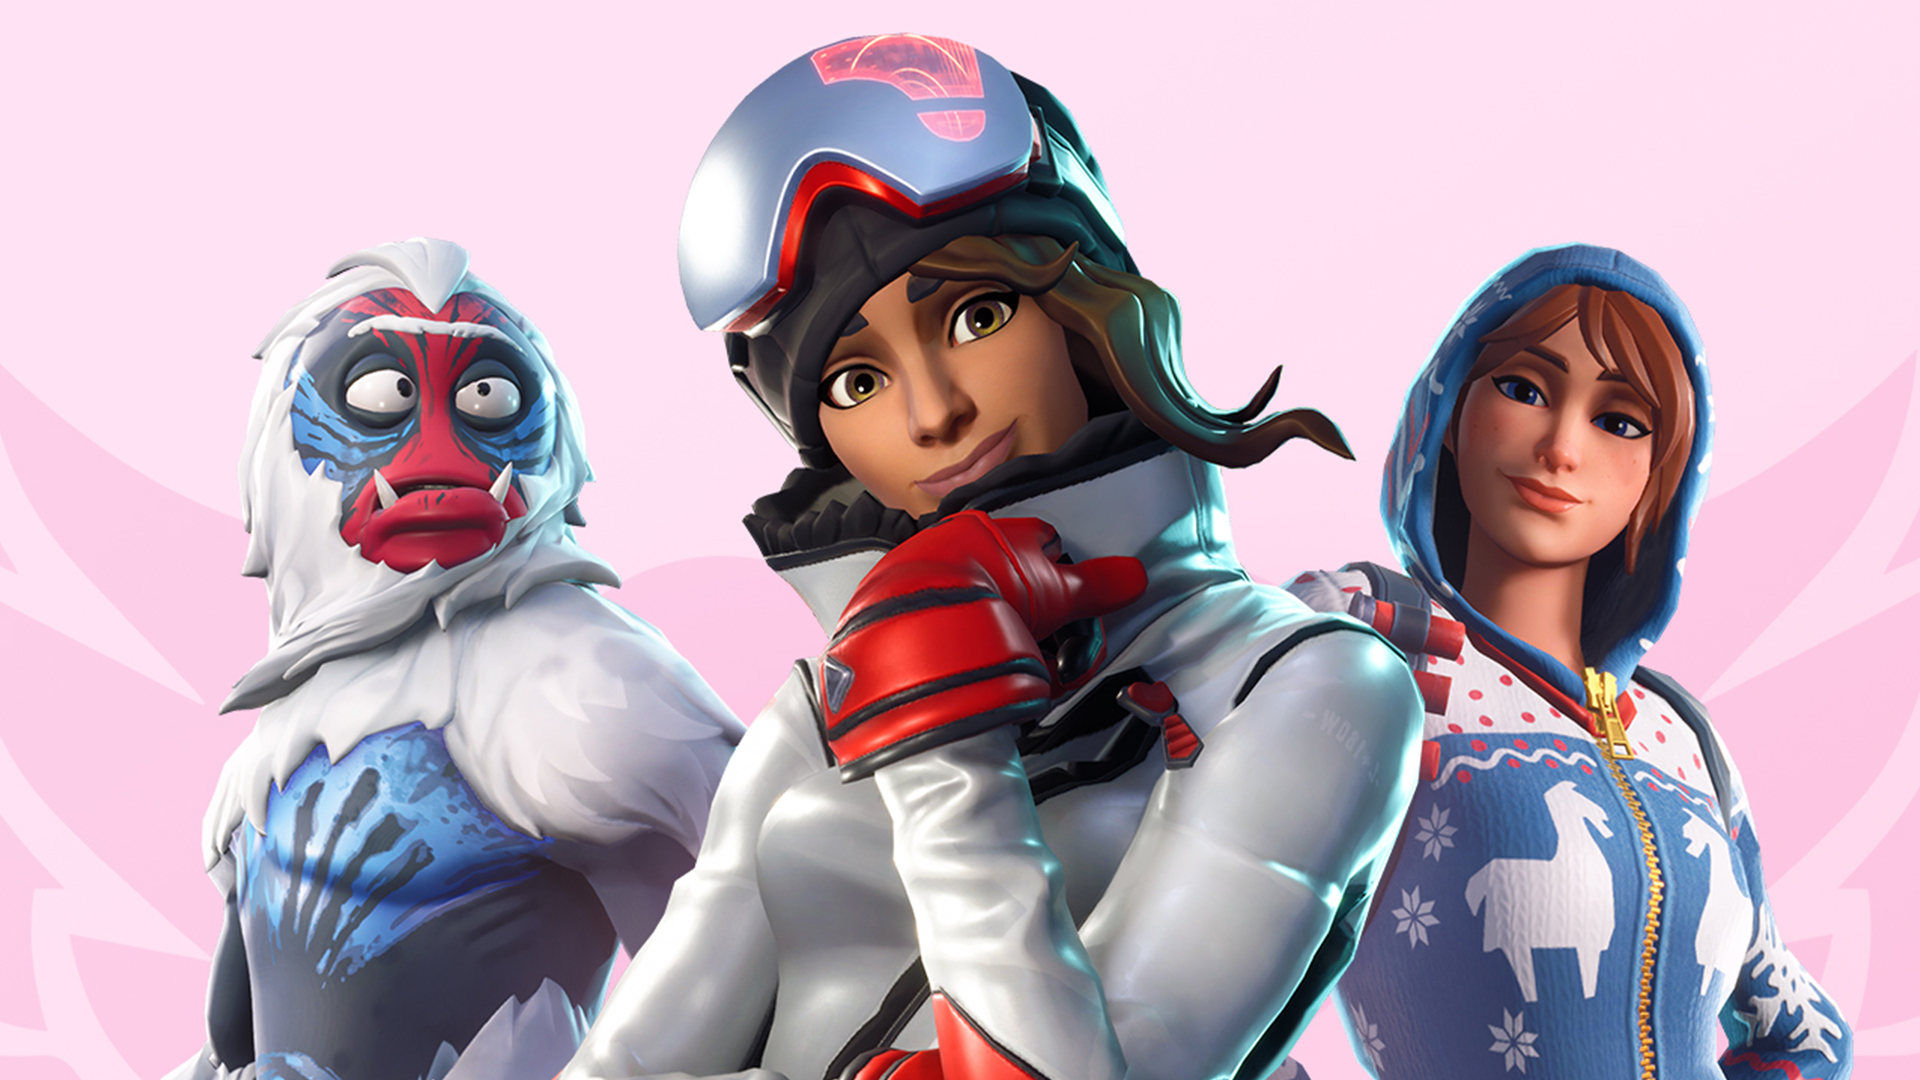 Fortnite invites you to Share the Love with Overtime Challenges and a tournament